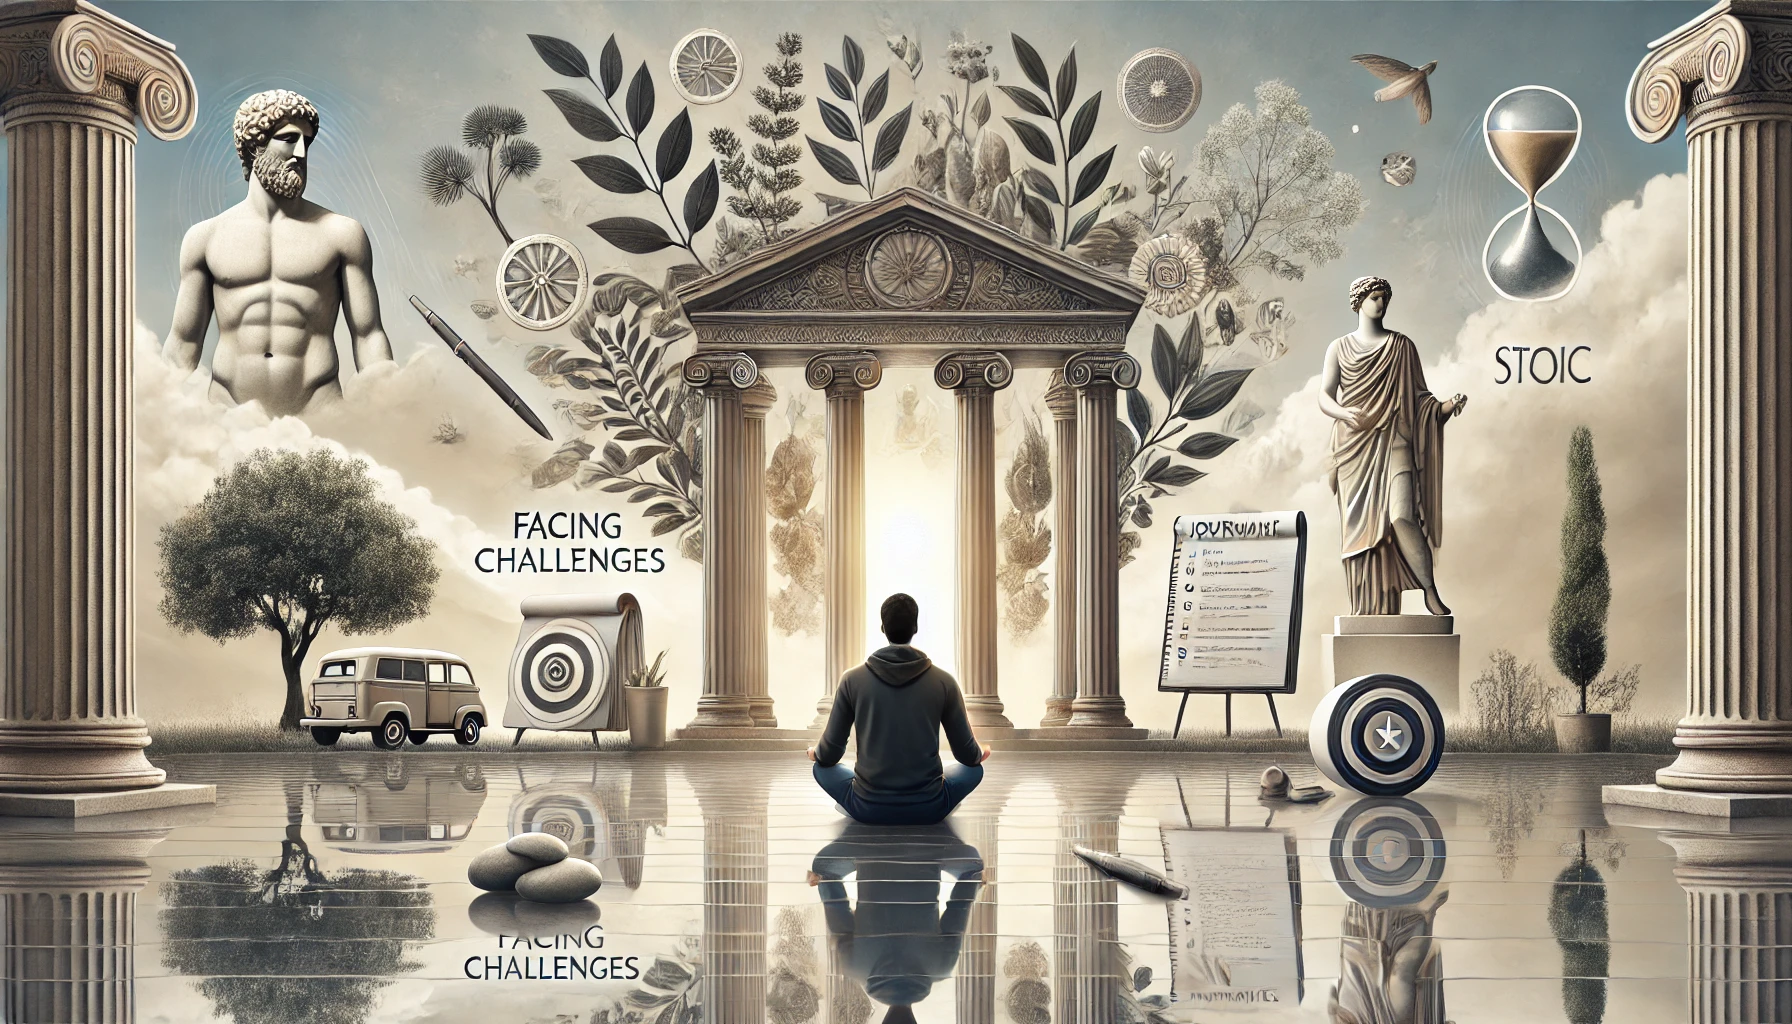 Modern individual practicing Stoic life rules such as journaling, meditation, and facing challenges, with Greek columns in the background symbolizing Stoic wisdom.